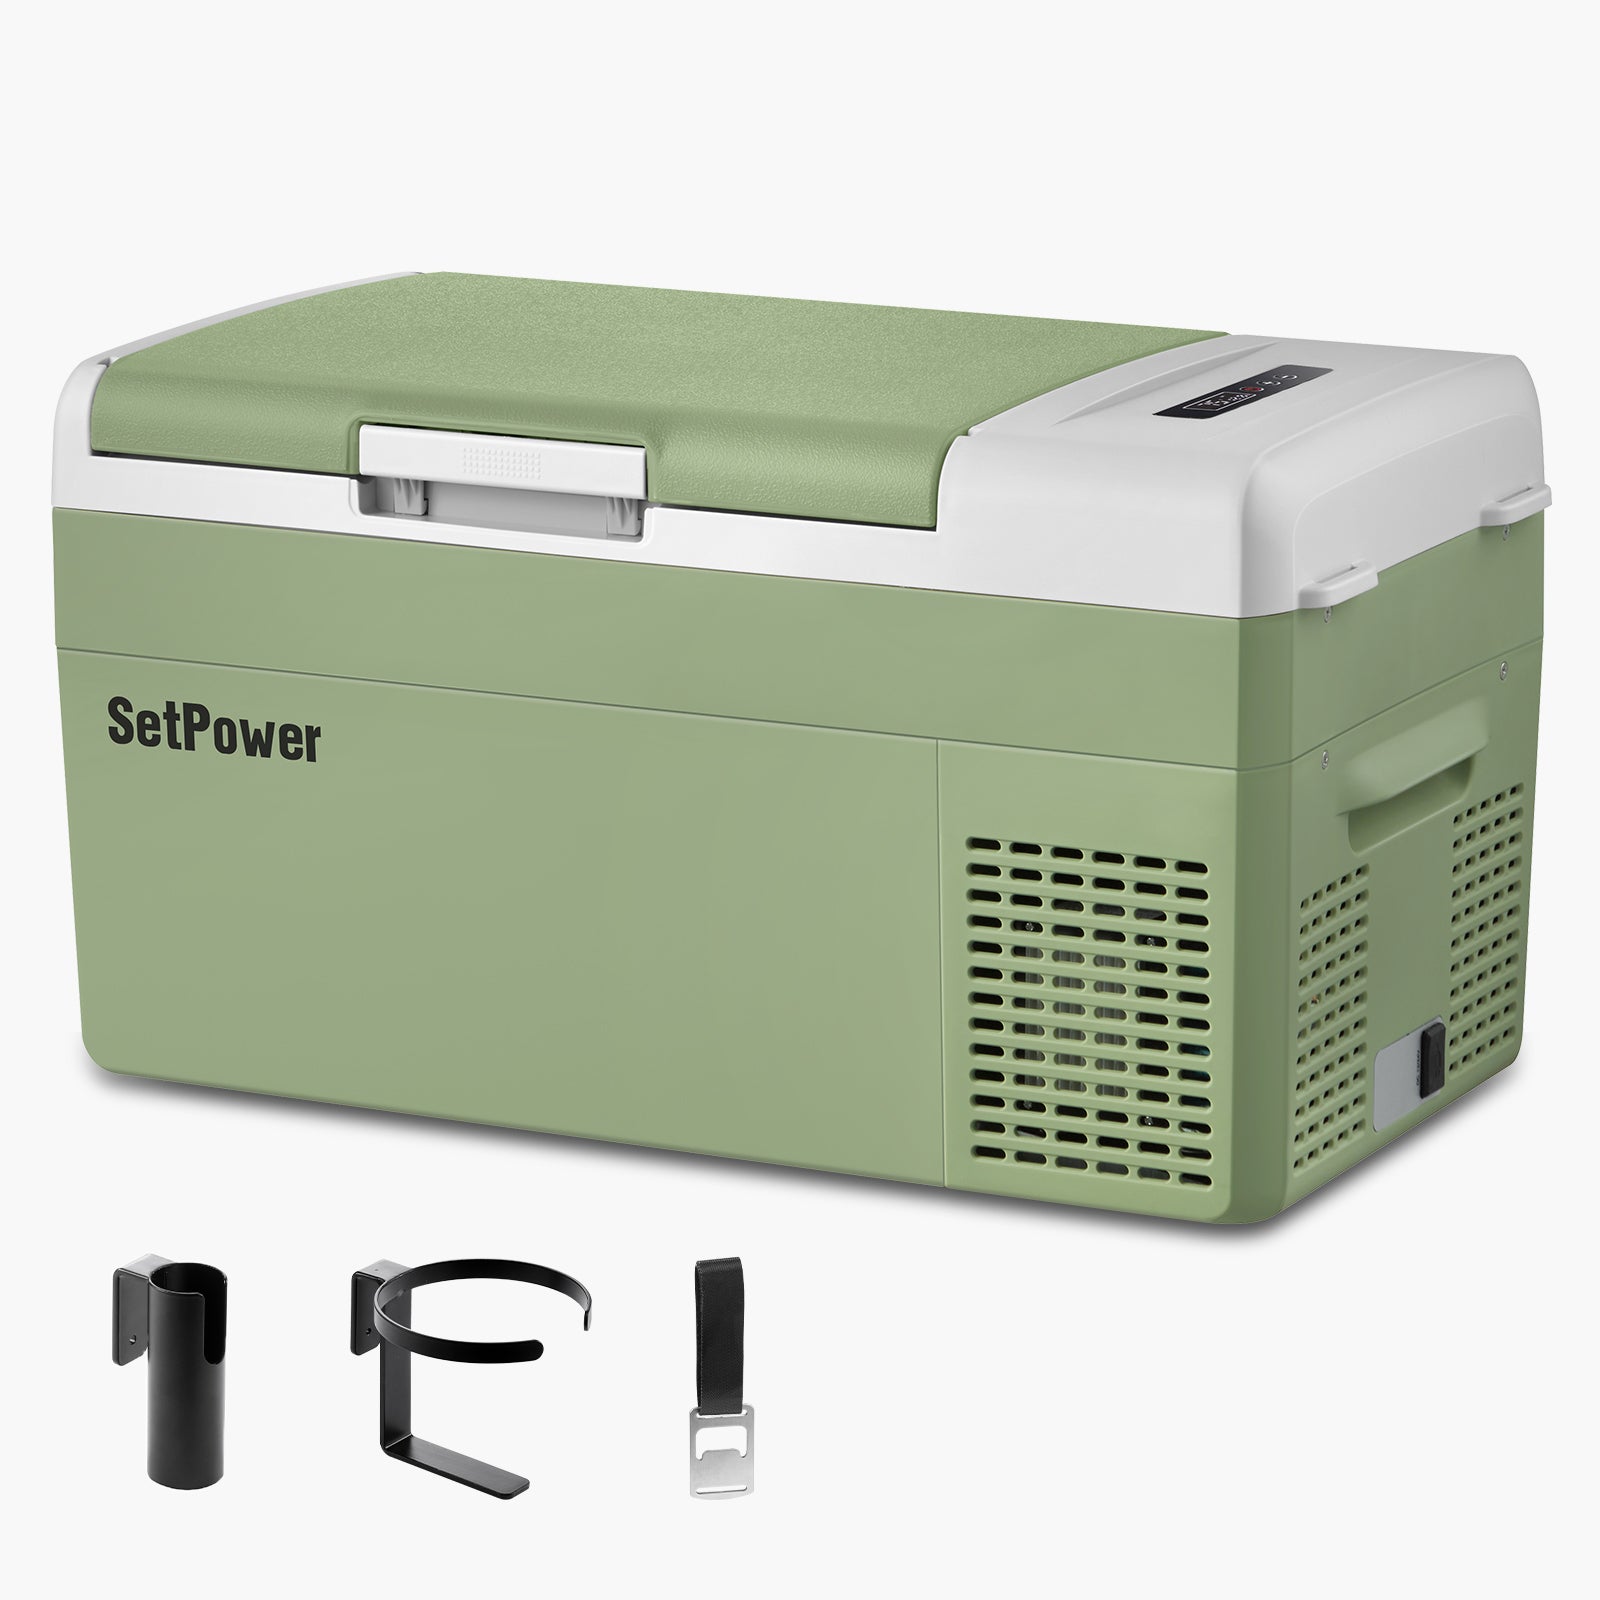 Setpower 15.8Qt FC15 Portable 12V Car Refrigerator With 3 Free Gifts - $109 Only